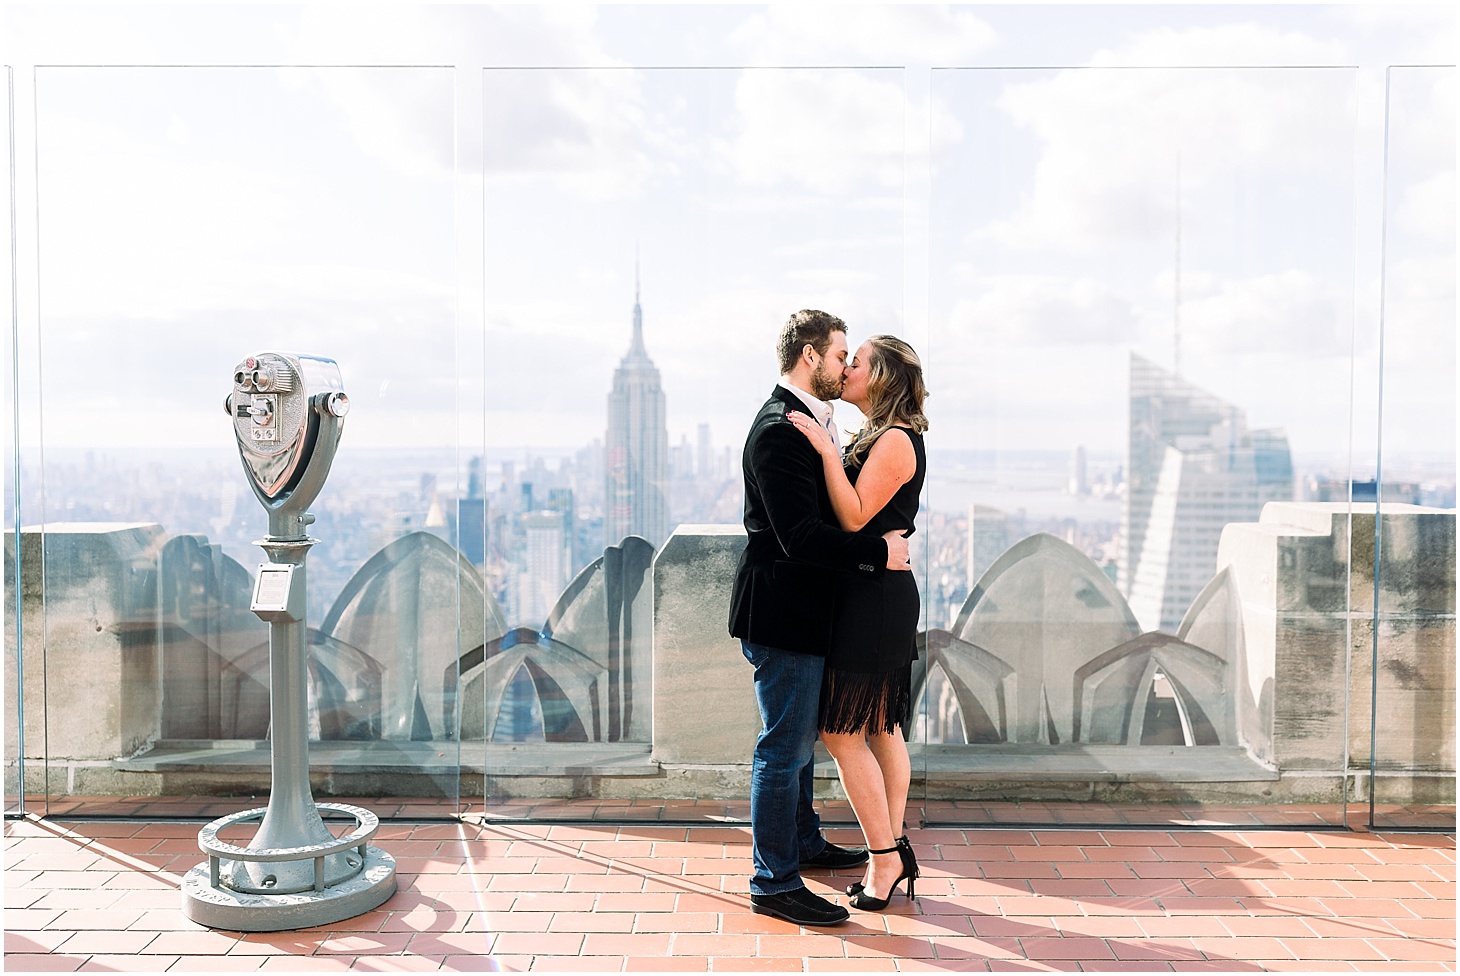 Engagement Portraits with New York City Skyline | Sunrise Engagement at the Brooklyn Bridge, Top of Rock, and Grand Central Station | Sarah Bradshaw Photography